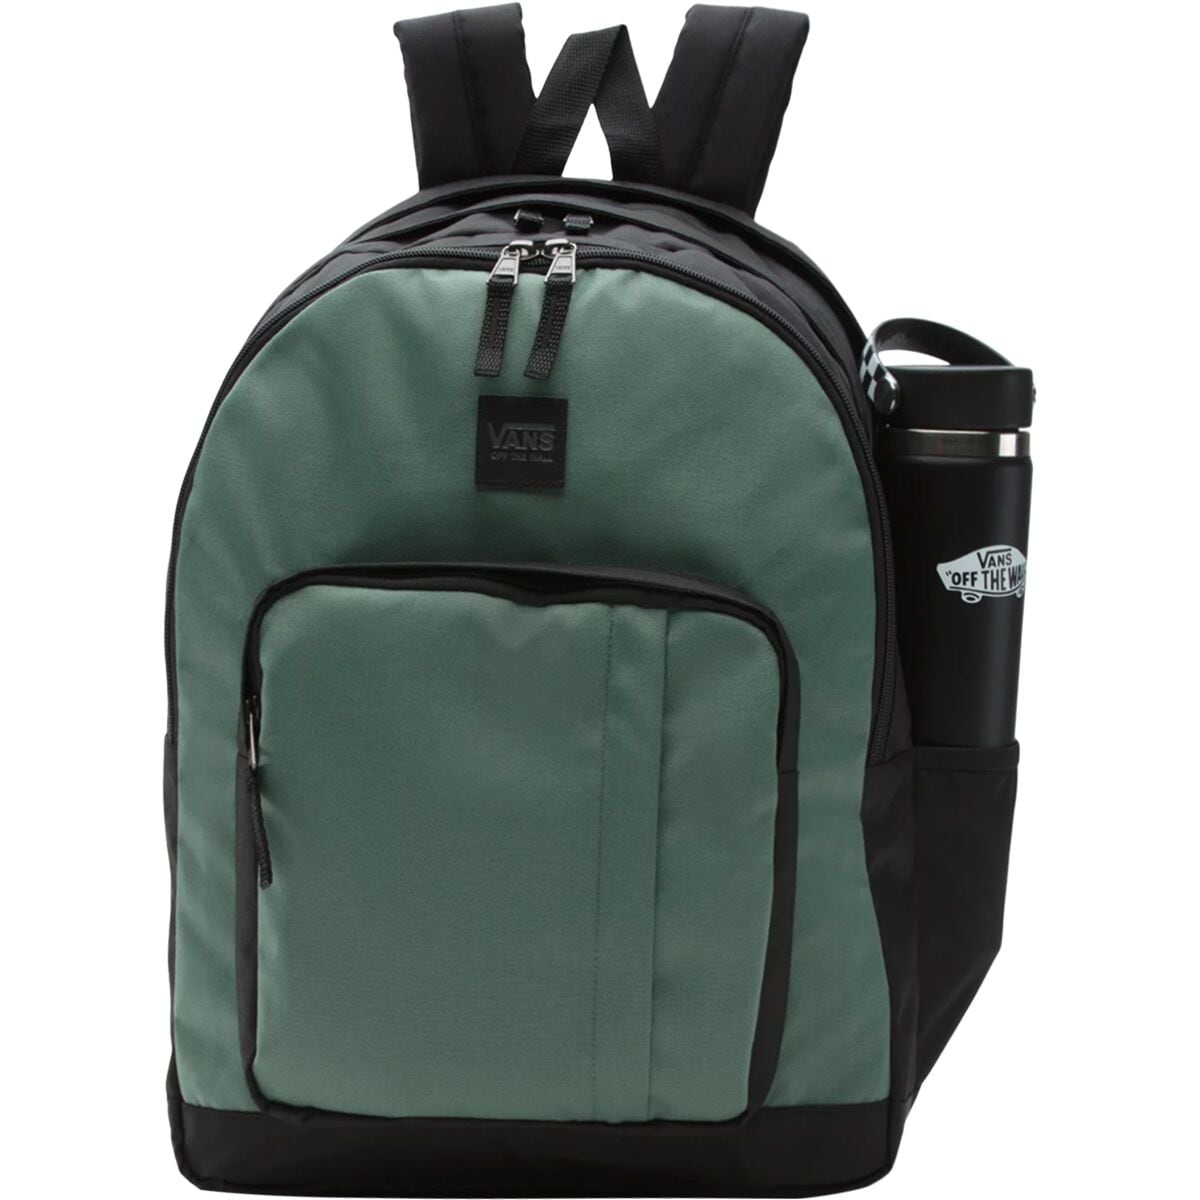 stad Inconsistent verband Vans In Session Backpack - Women's - Accessories